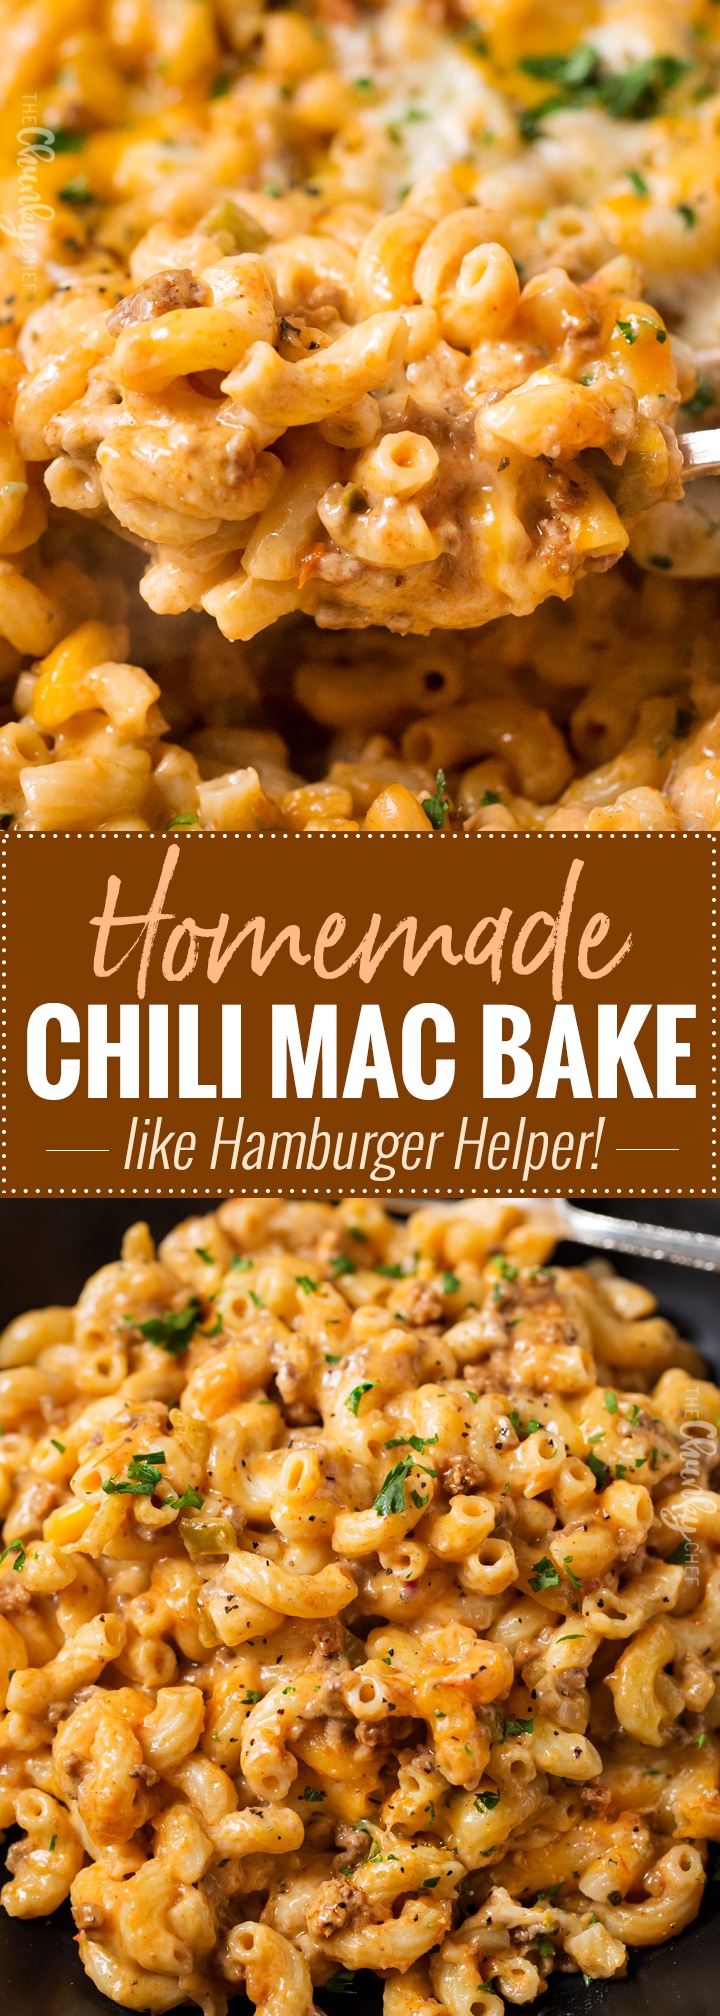 Homemade Chili Mac Bake | Hearty, cheesy, and comfort food the whole family will love!  Perfect for a busy weeknight, and leftovers are just as amazing! | http://thechunkychef.com